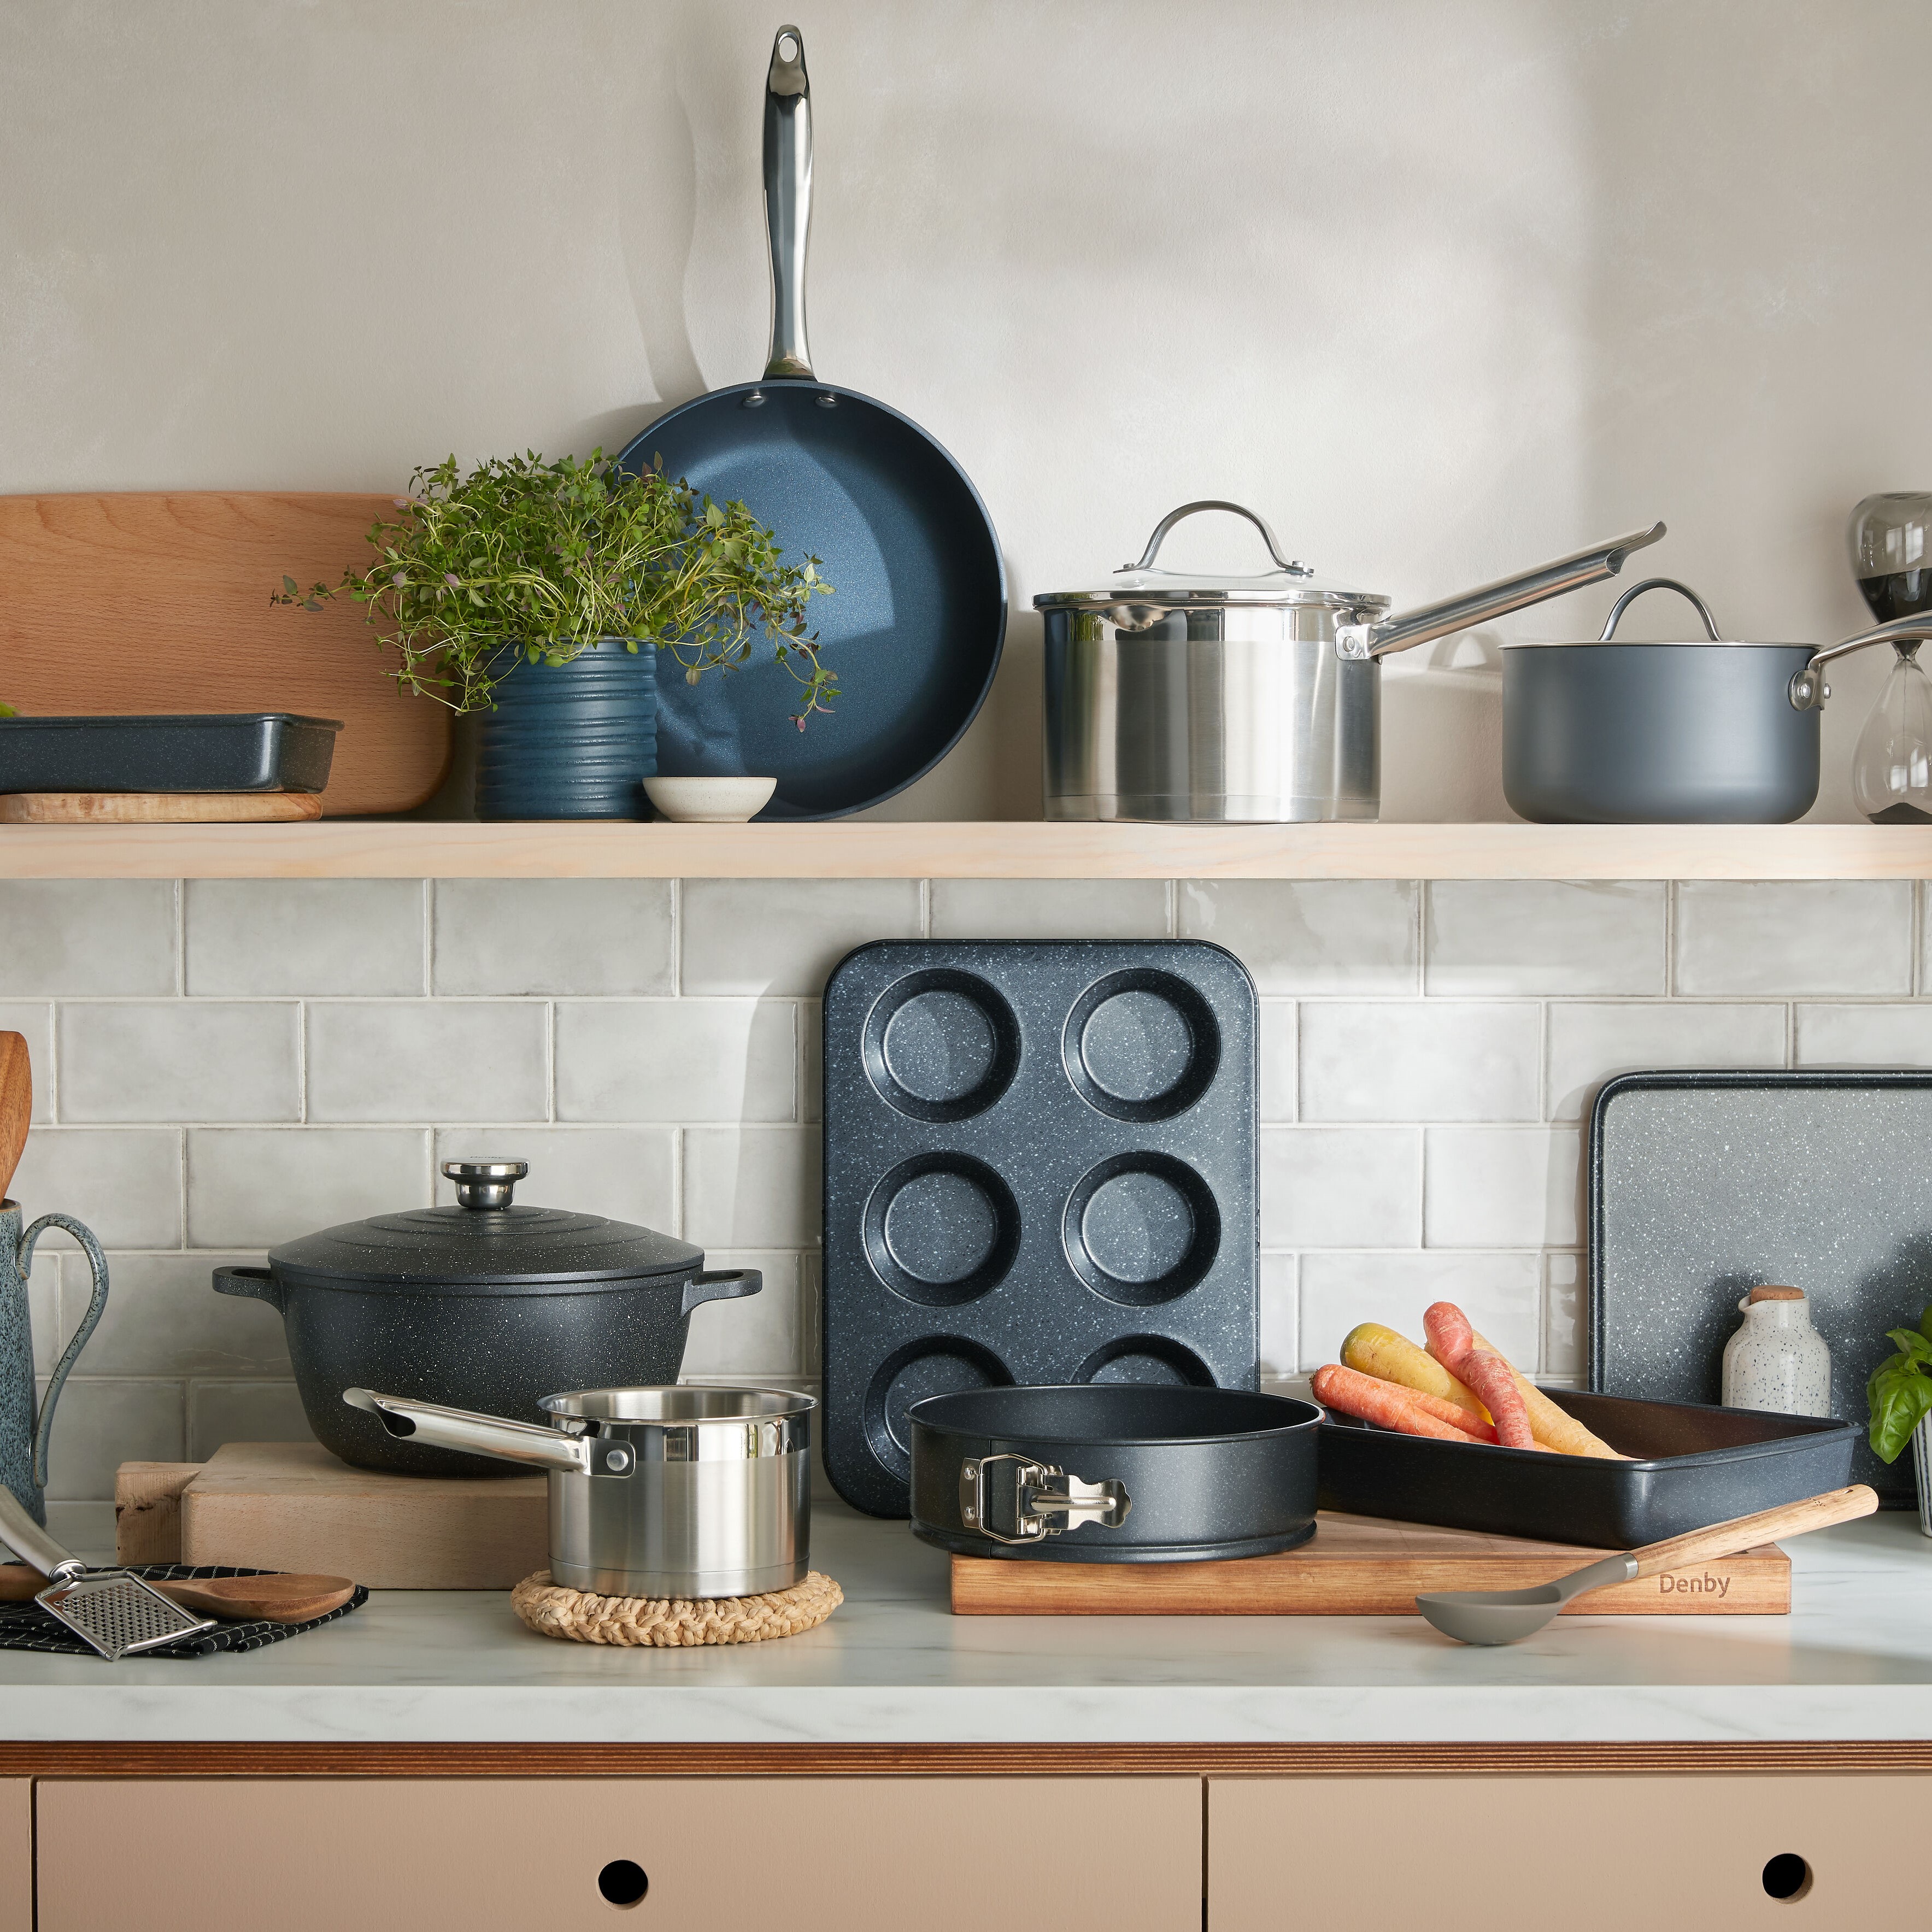 Save up to 50% off Denby cookware & kitchenware
Saving an extra 28% off outlet price
 - Please see in-store for more details.

